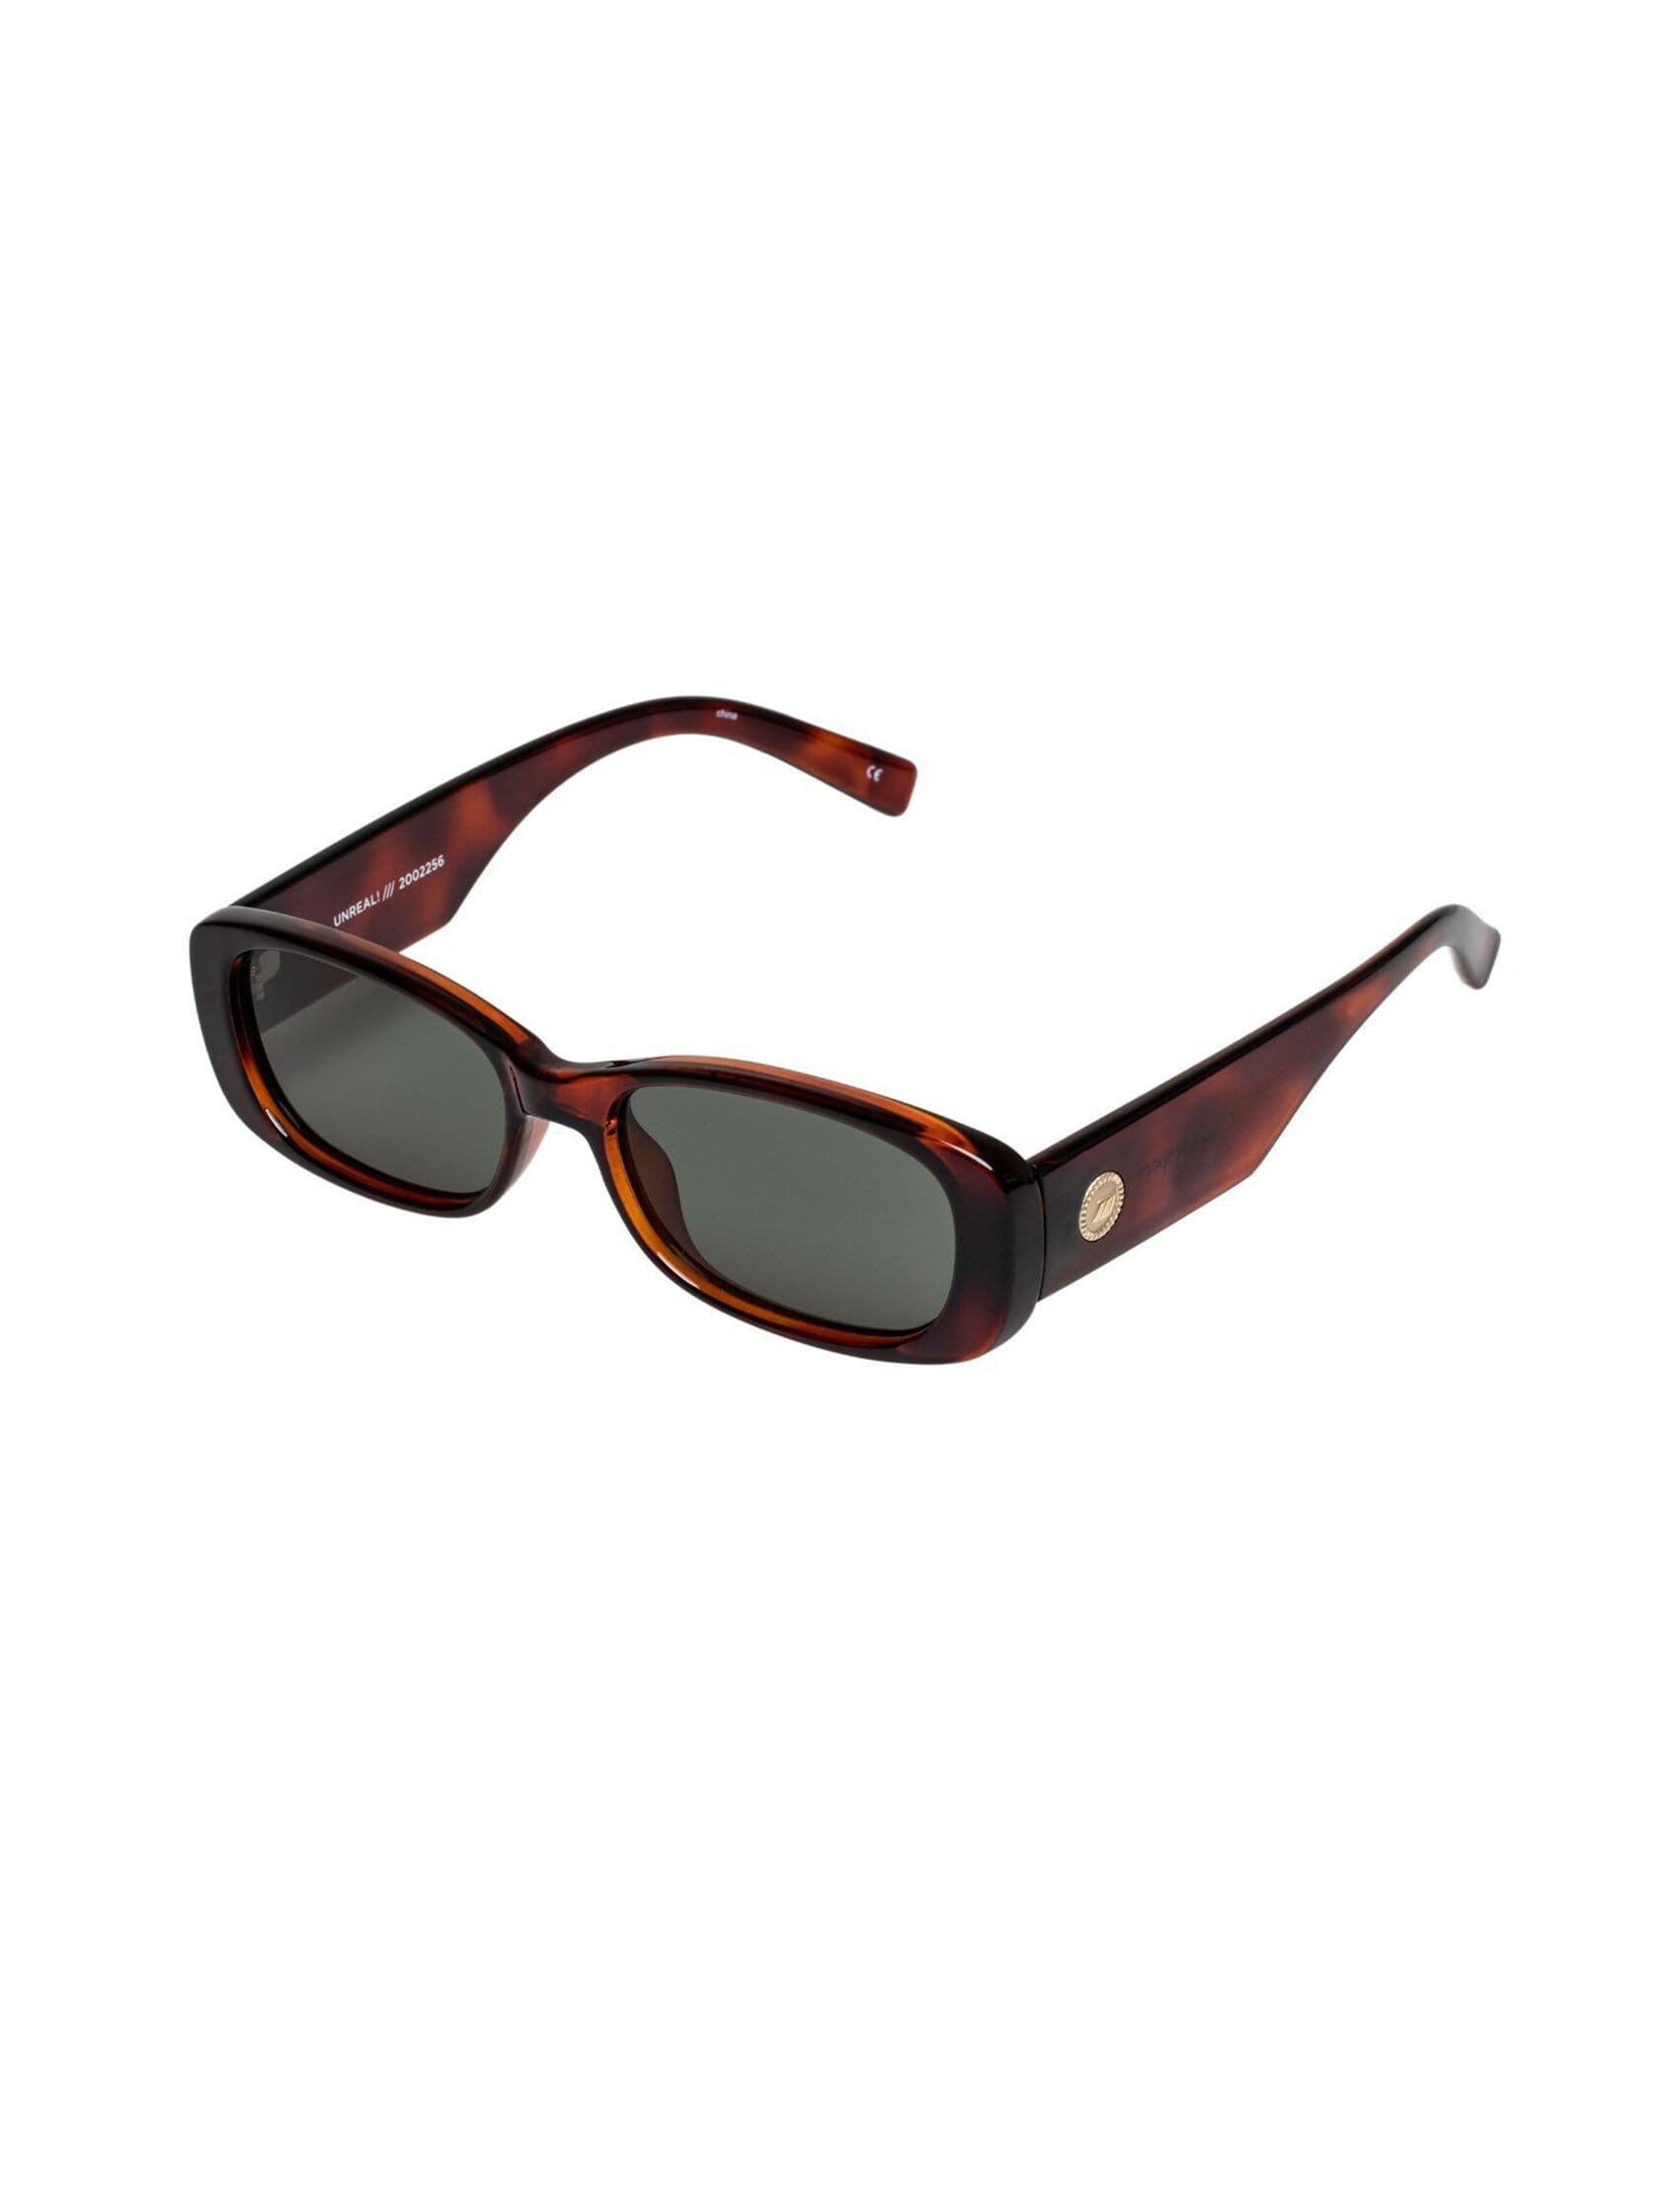 Le Specs Unreal Sunglasses In Toffee Tort Fashionpass 2015